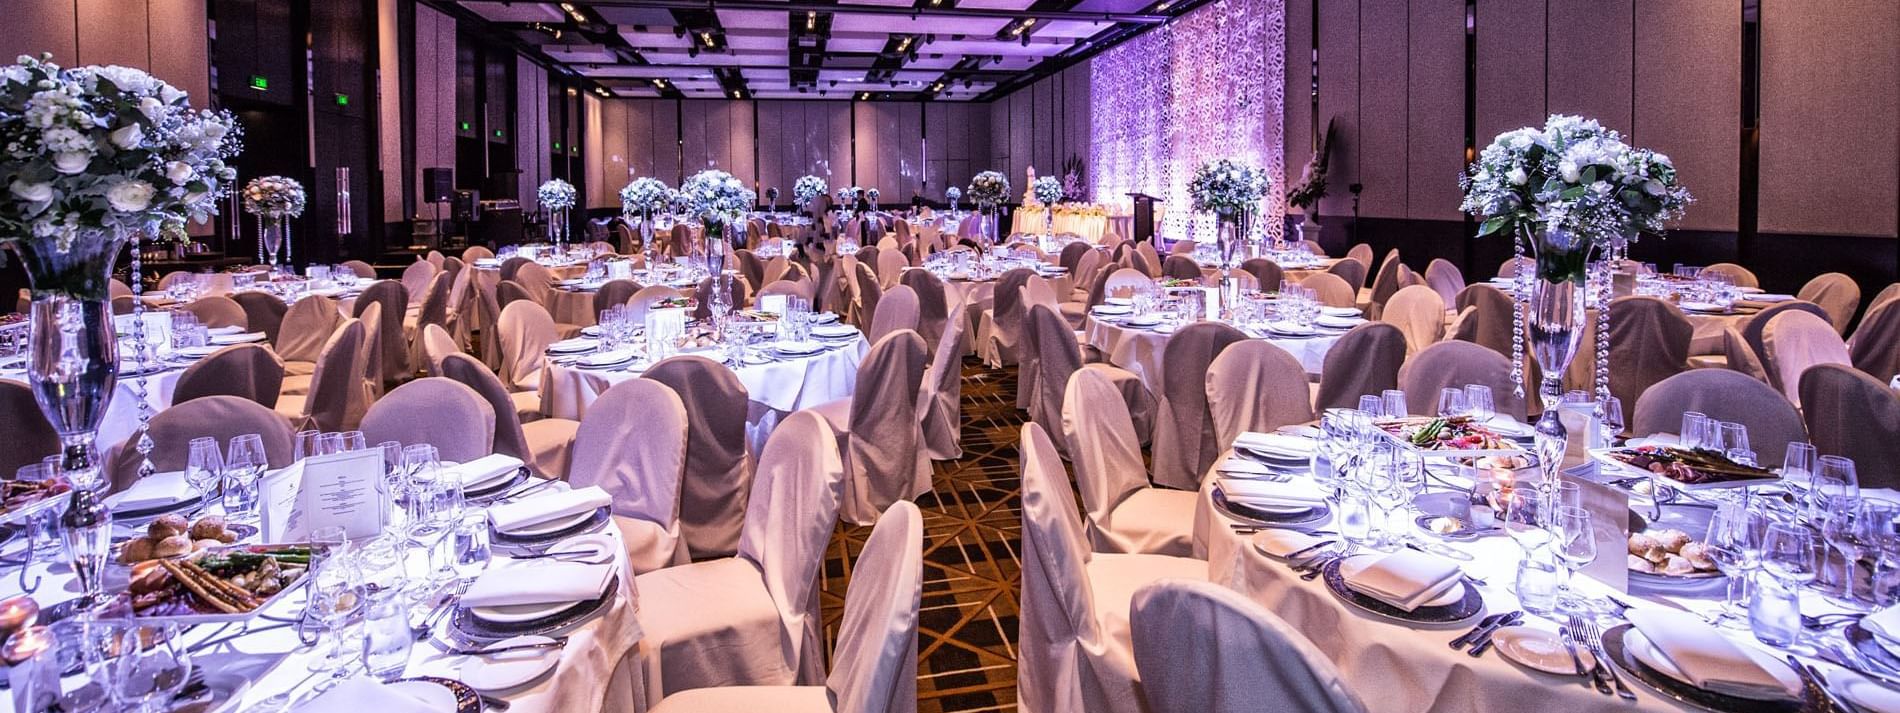 Banquet tables arranged in a hall at Crown Hotel Perth Spa